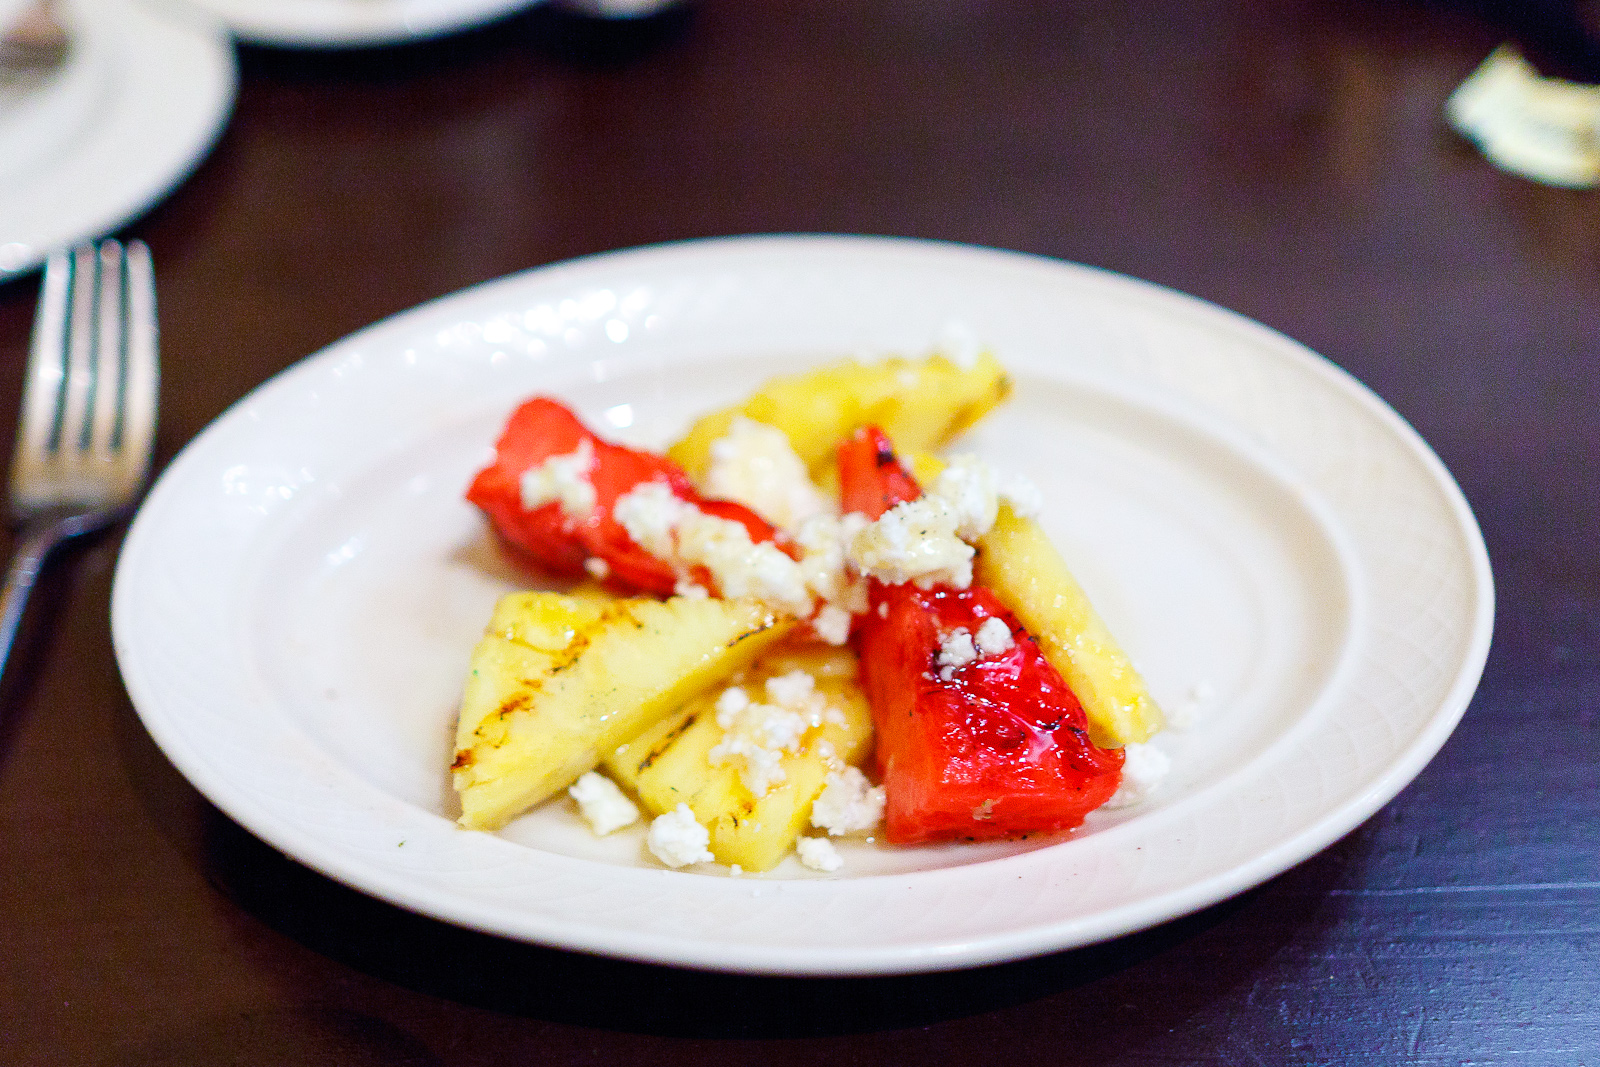 Grilled pineapple and watermelon, feta, honey, crushed pepper ($5)